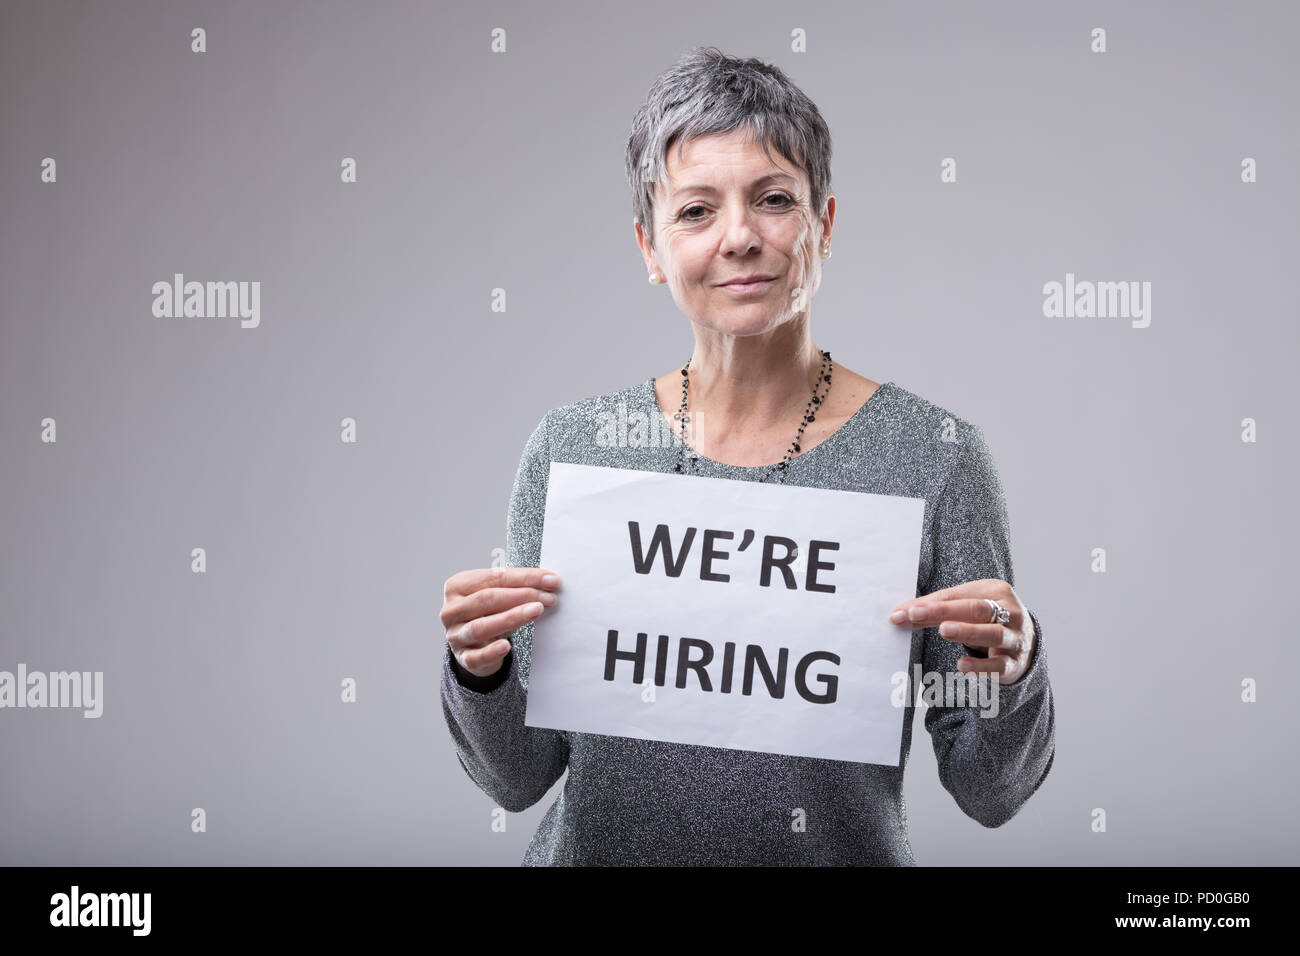 Personnel manageress holding up a sign - We're Hiring - in front of her chest in an employment and human resources concept over grey with copy space Stock Photo